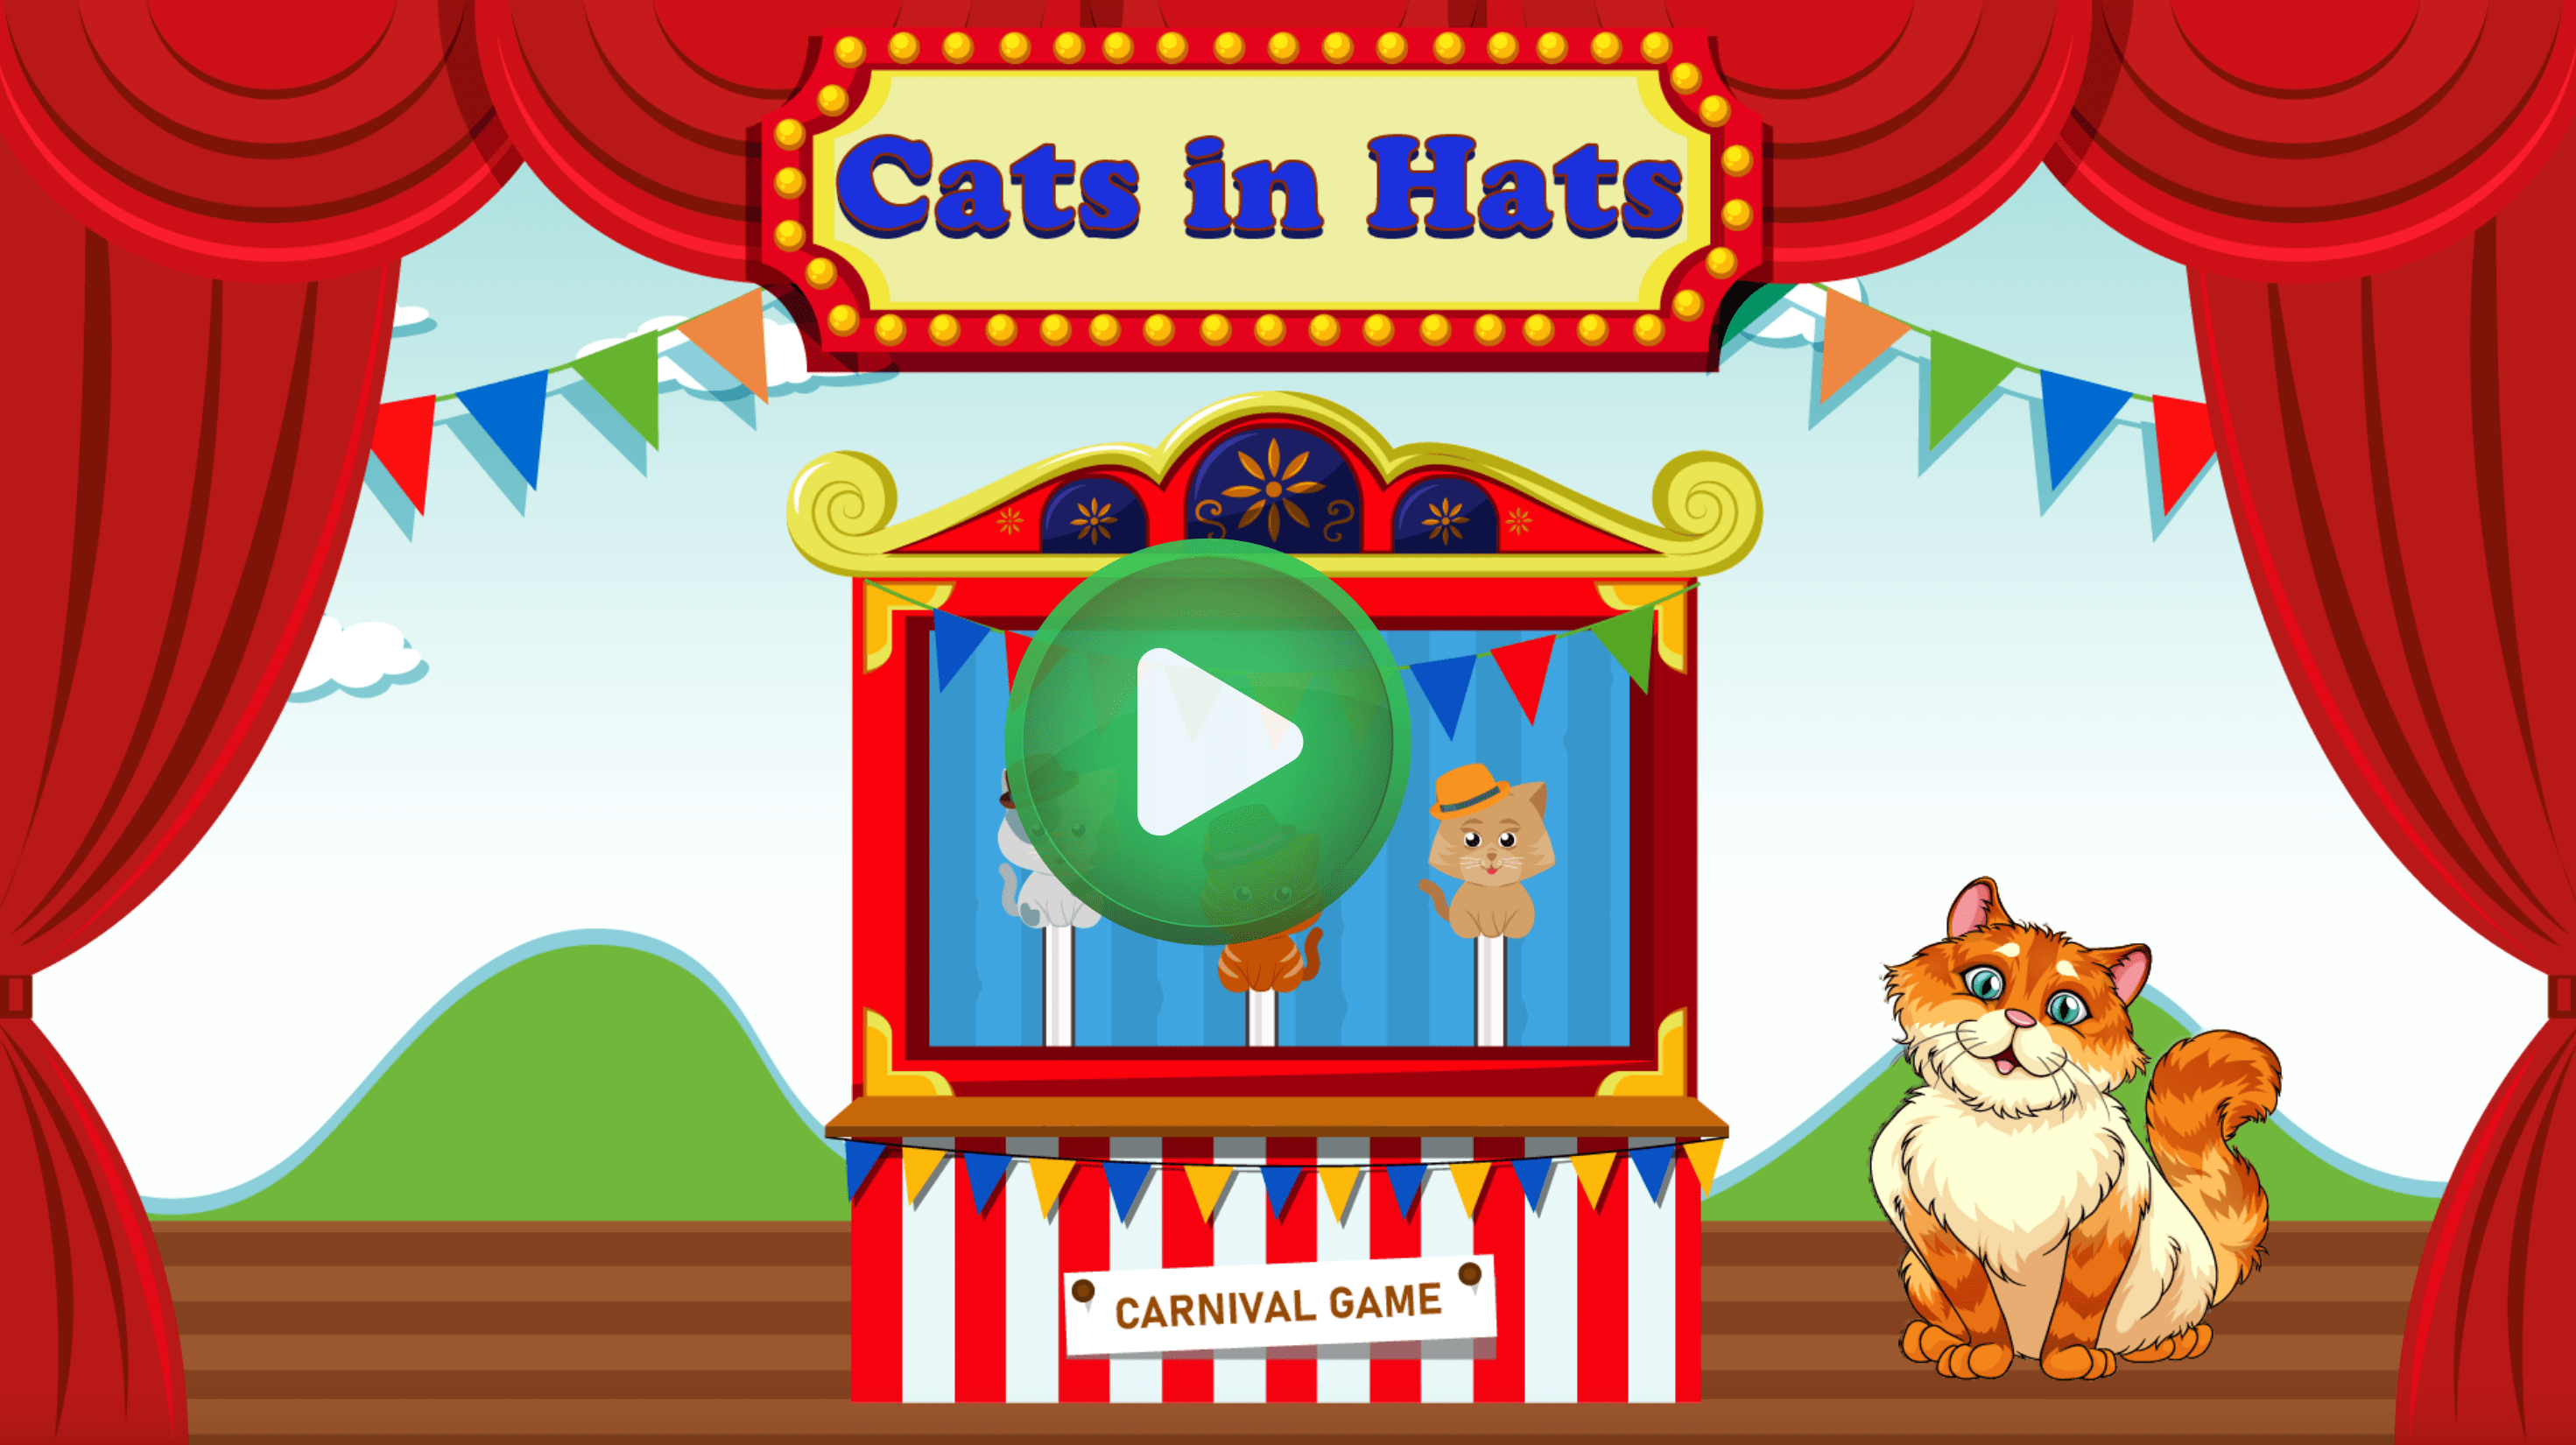 Game title screen featuring a cat at a carnival attraction and a green play button.